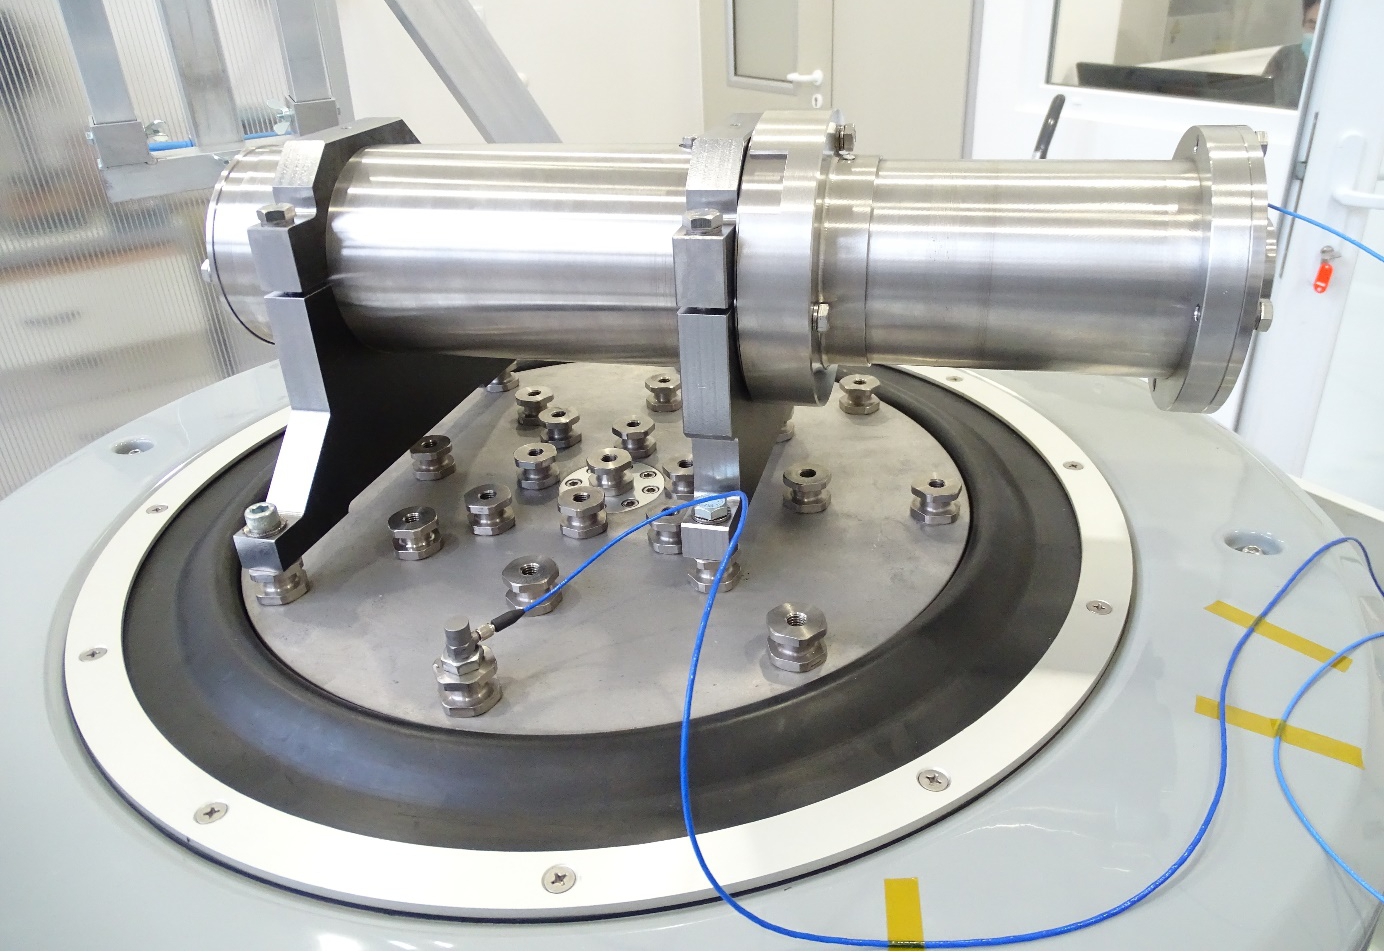 Model lens assembly fixed to the vibration table